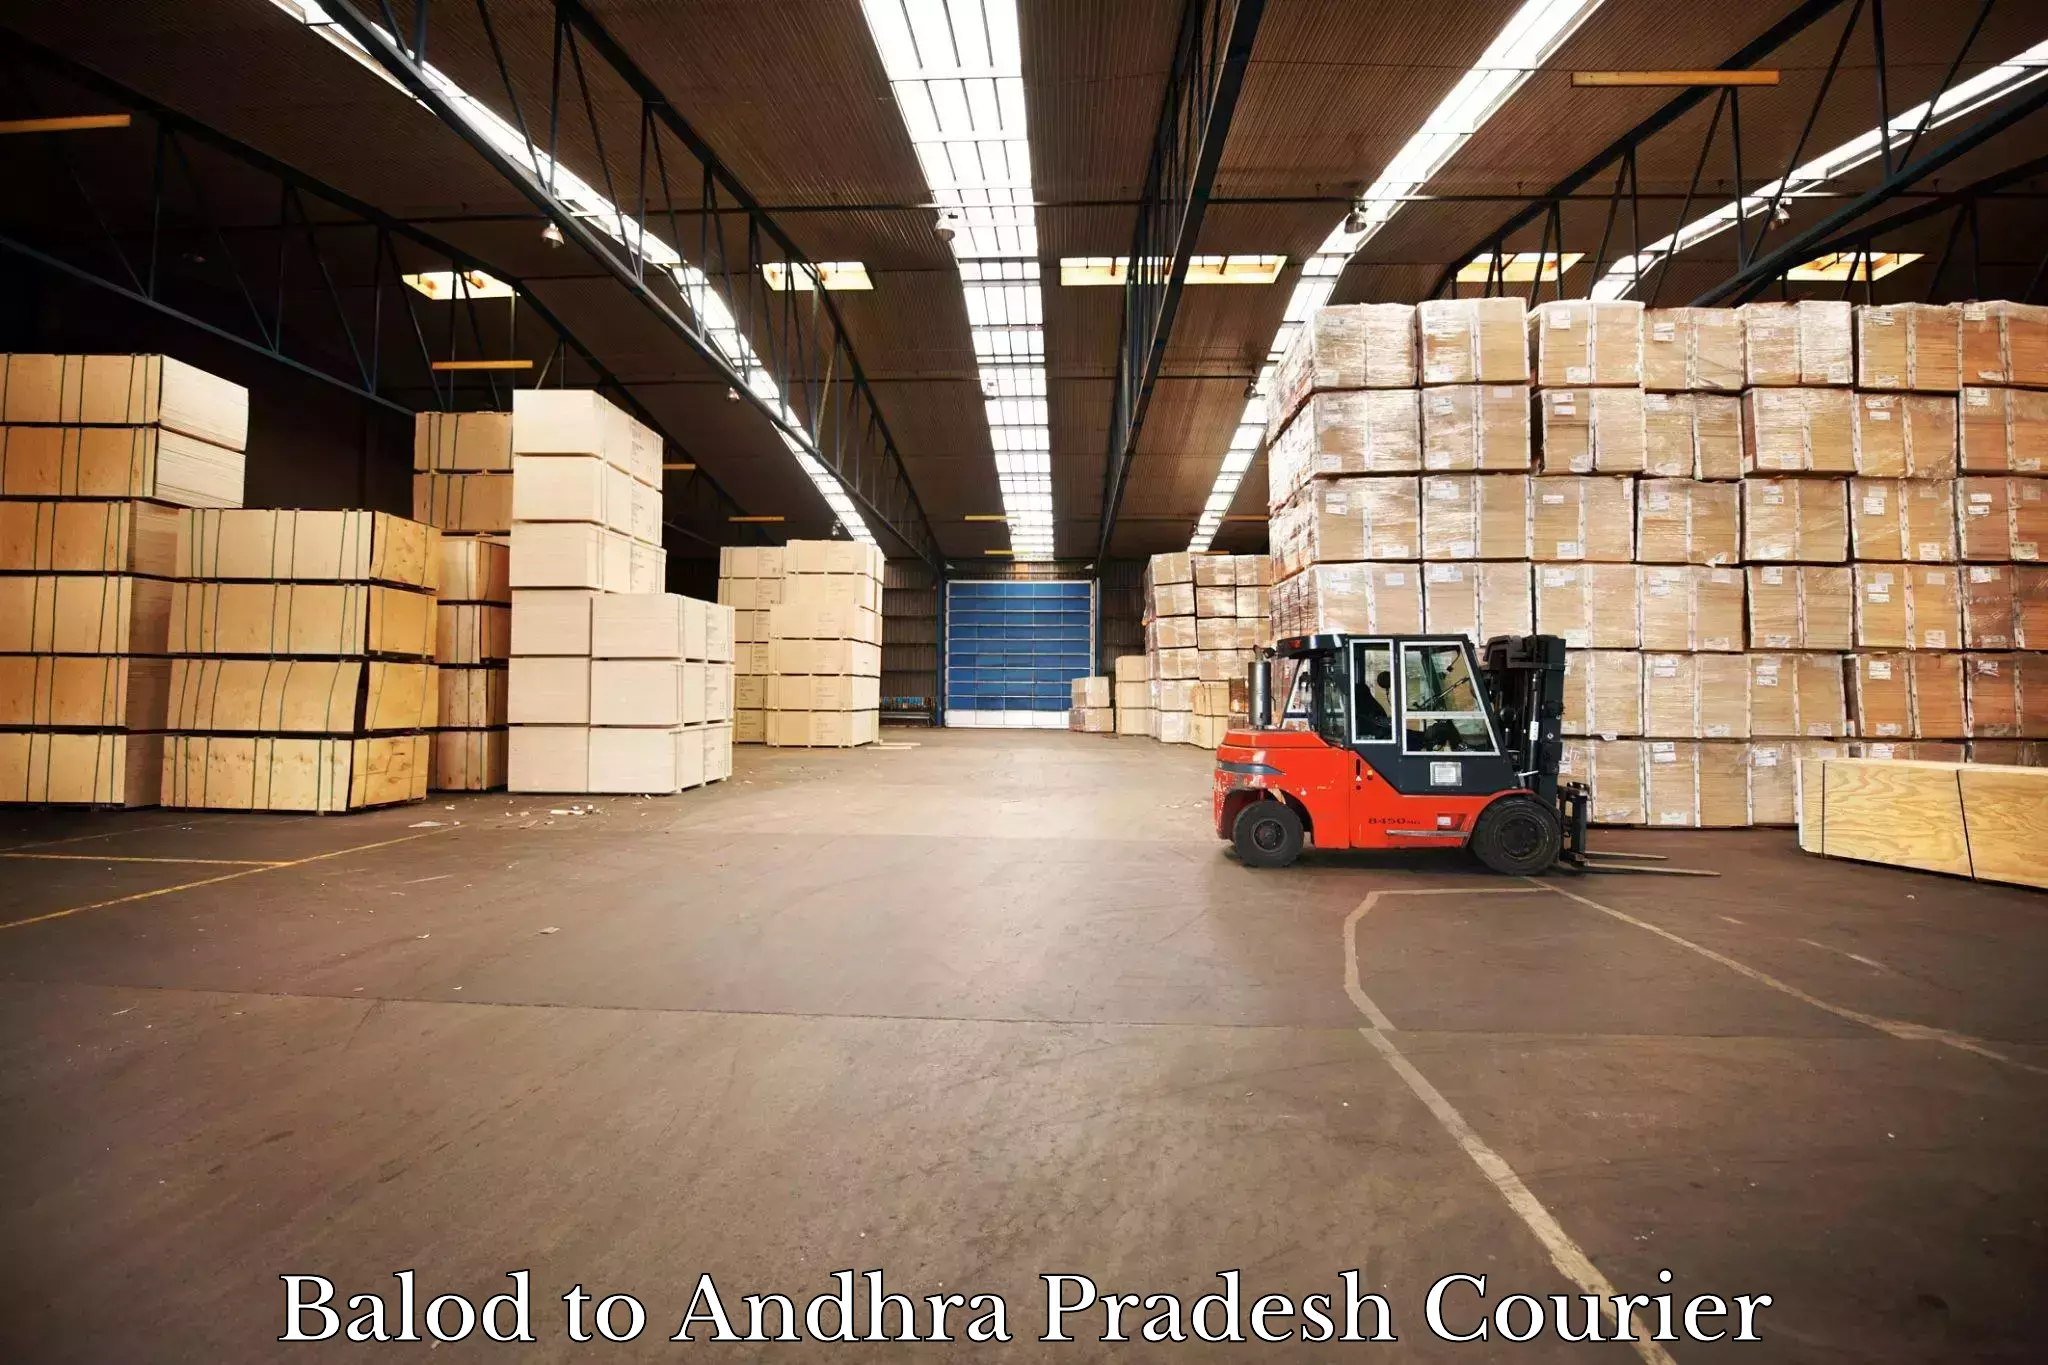 Quality courier services Balod to Visakhapatnam